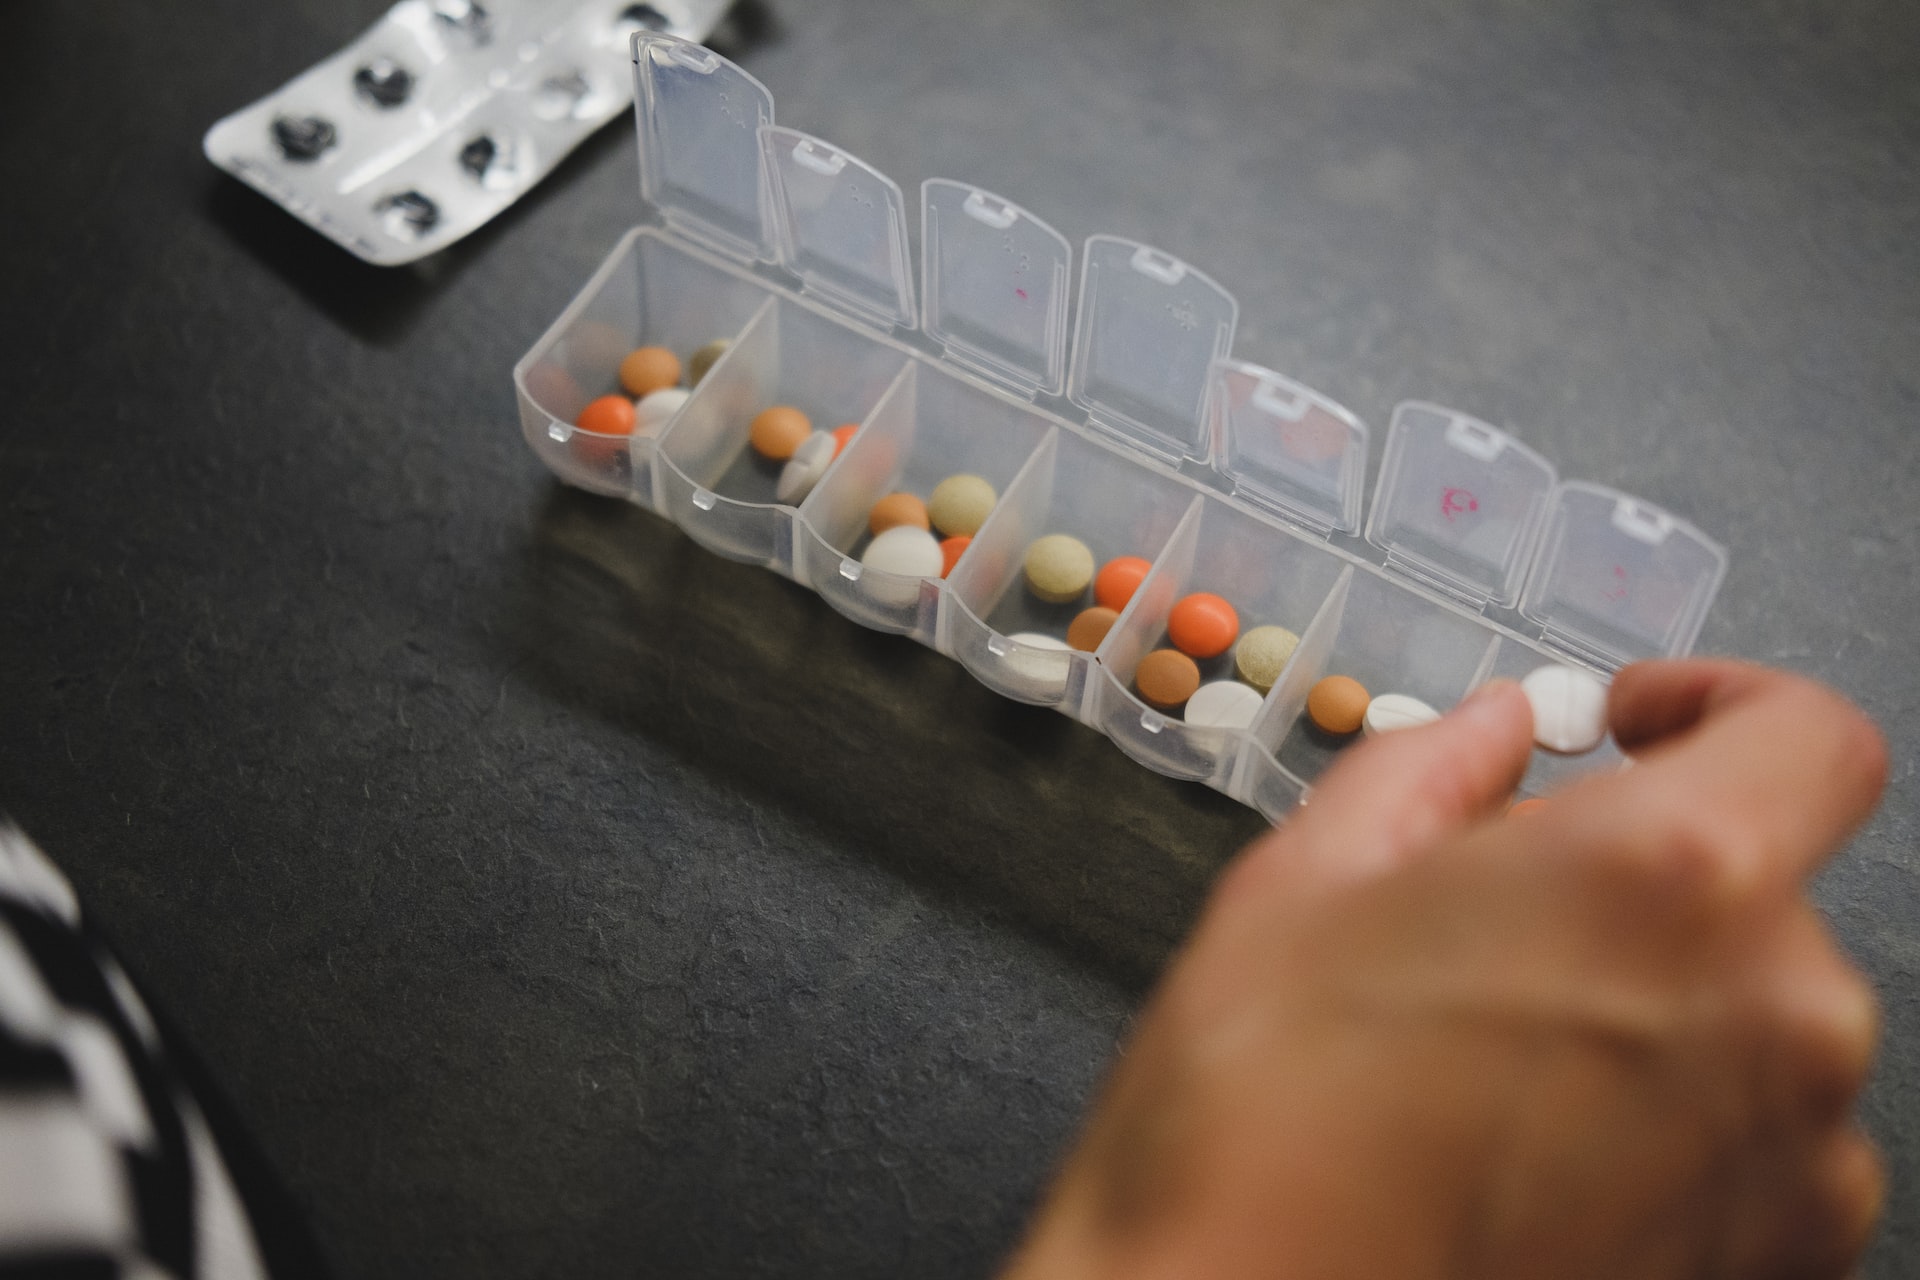 A hand arranging medications in a plastic carry case.